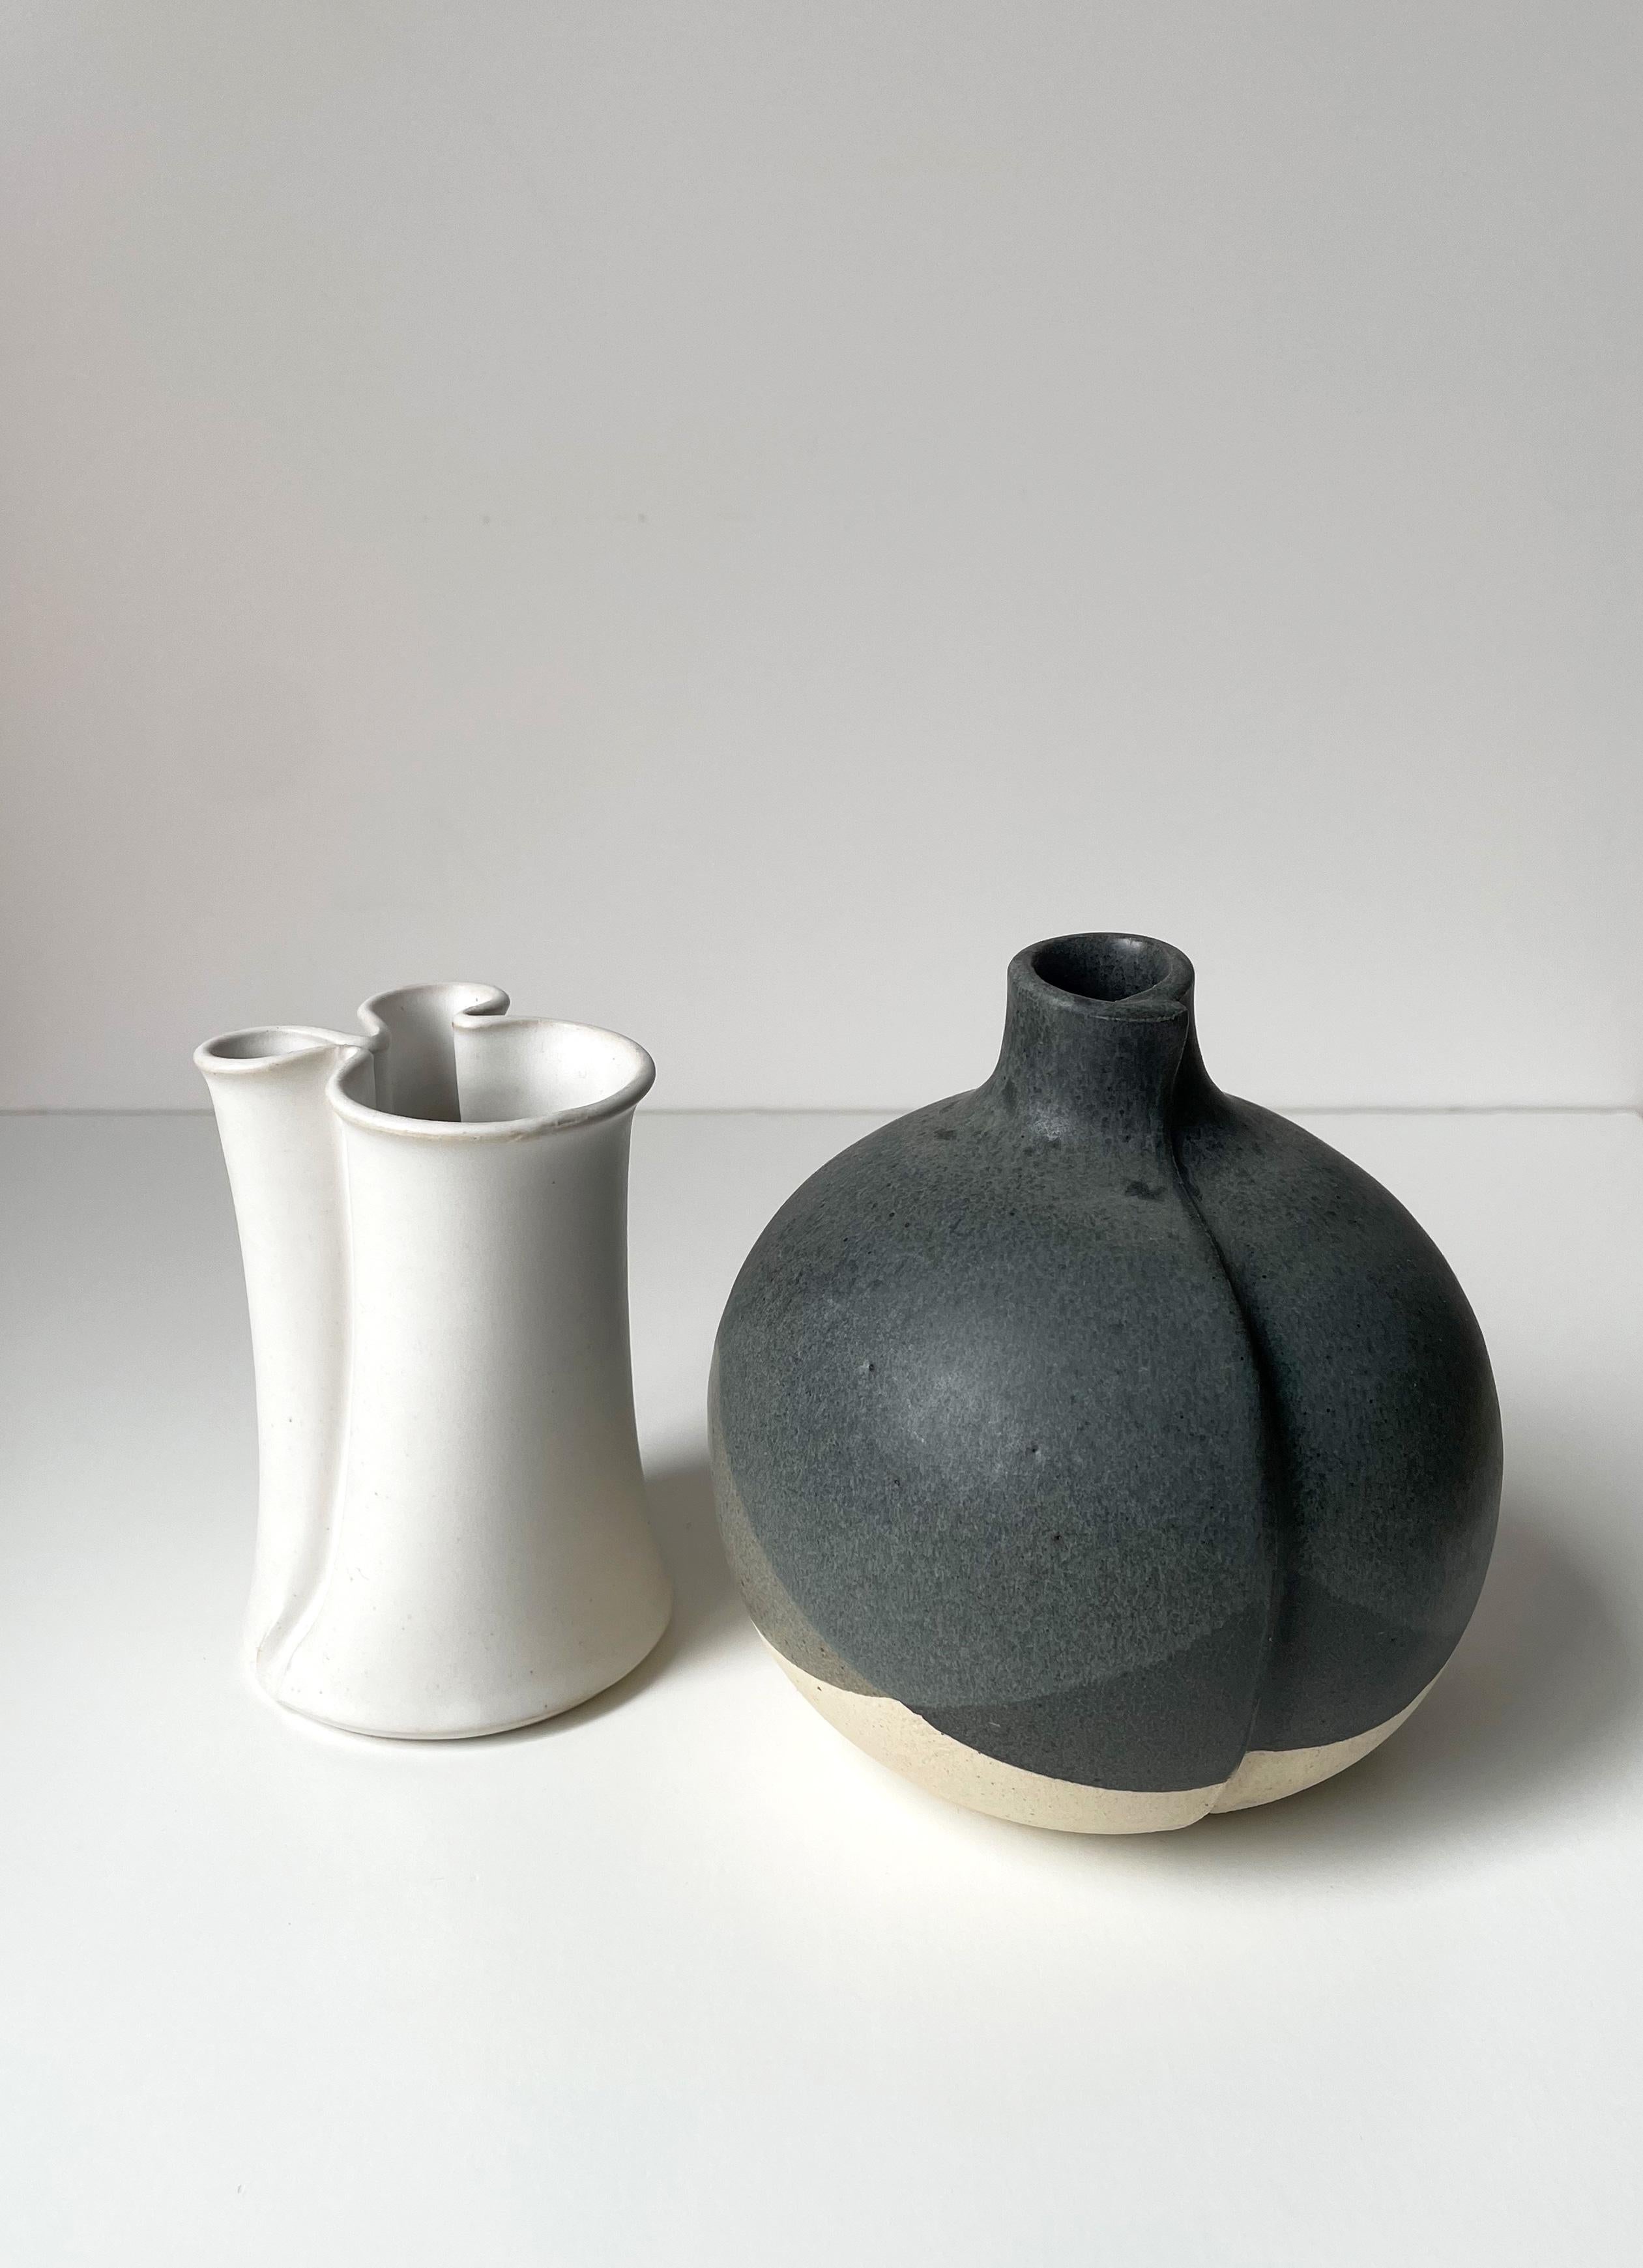 Set of two Danish modernist vases with soft, organic shapes and muted colors designed by acclaimed ceramic artist Aage Würtz in the 1980s. The father-son duo KH Würtz is one of Denmark's most recognized ceramic companies making handmade tableware